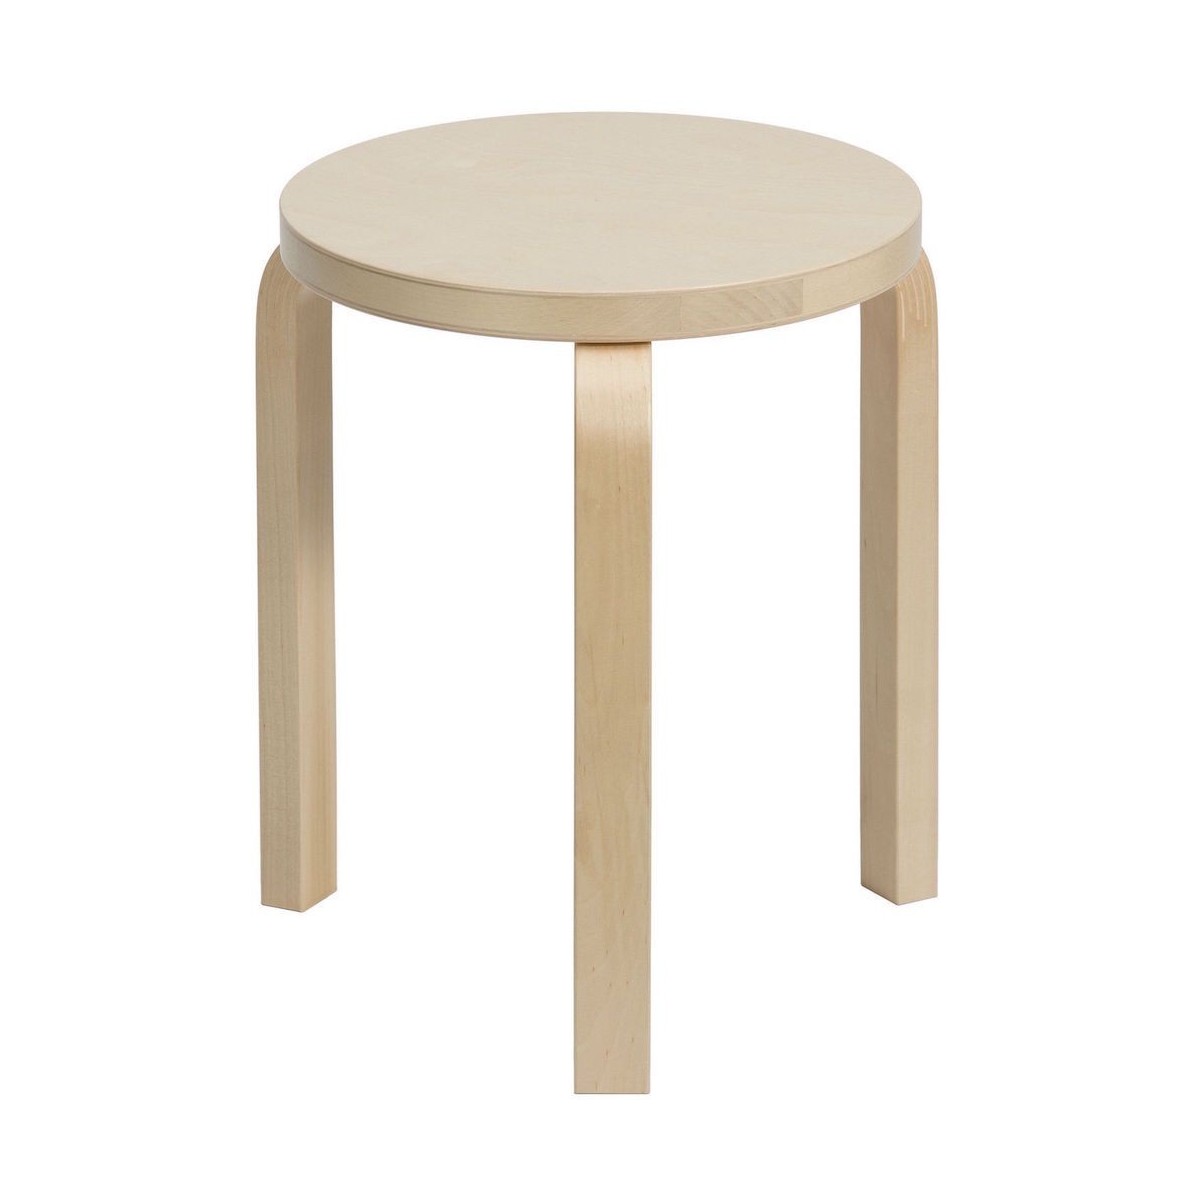 natural birch - Stool 60 - classic edition